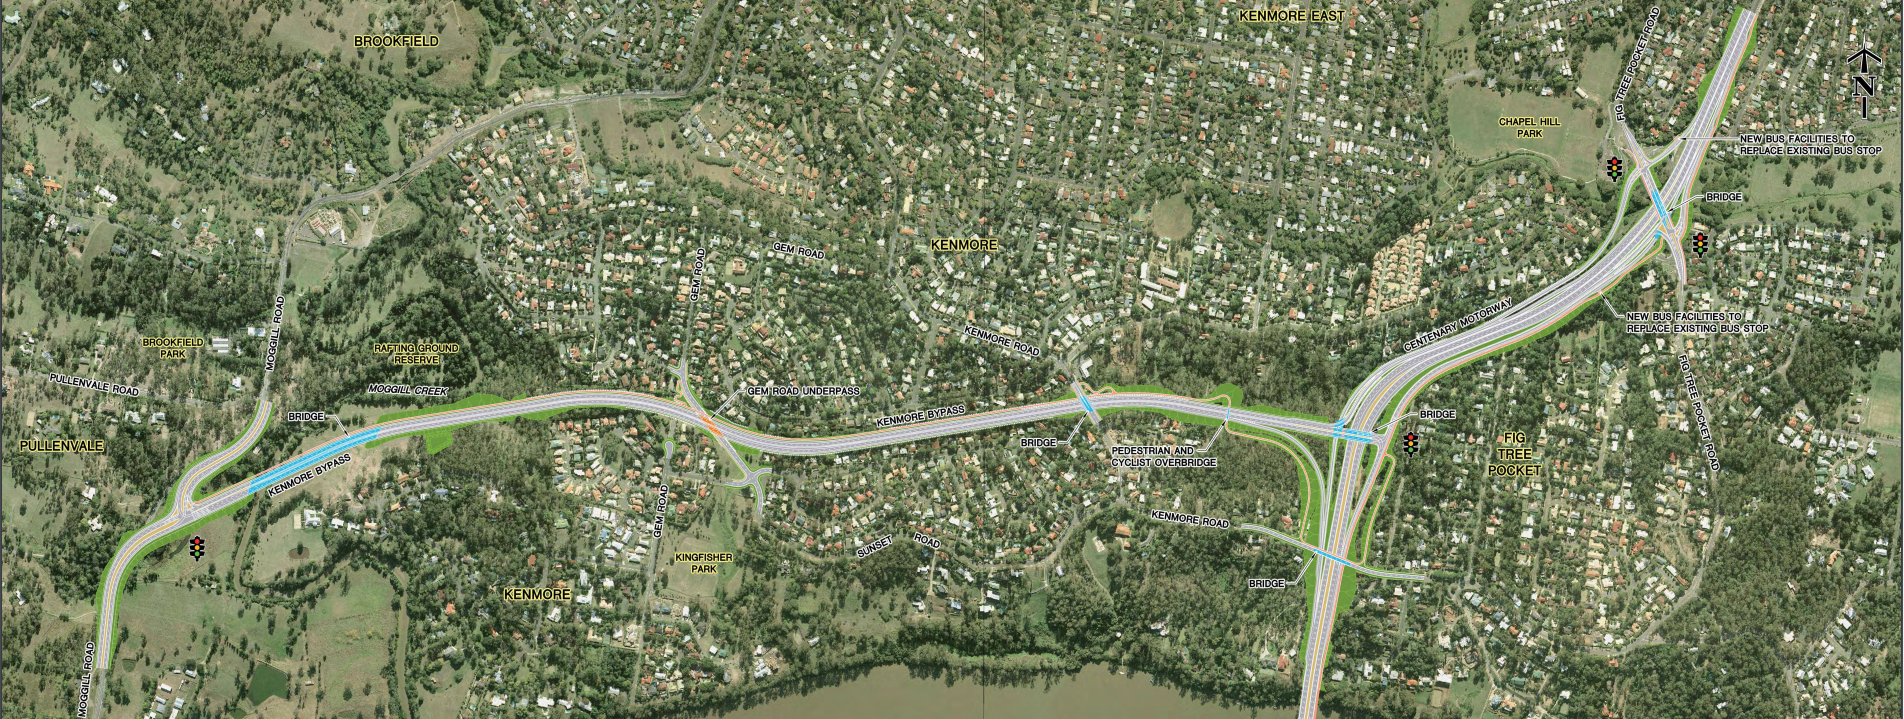 Planning design for the Kenmore bypass planning study